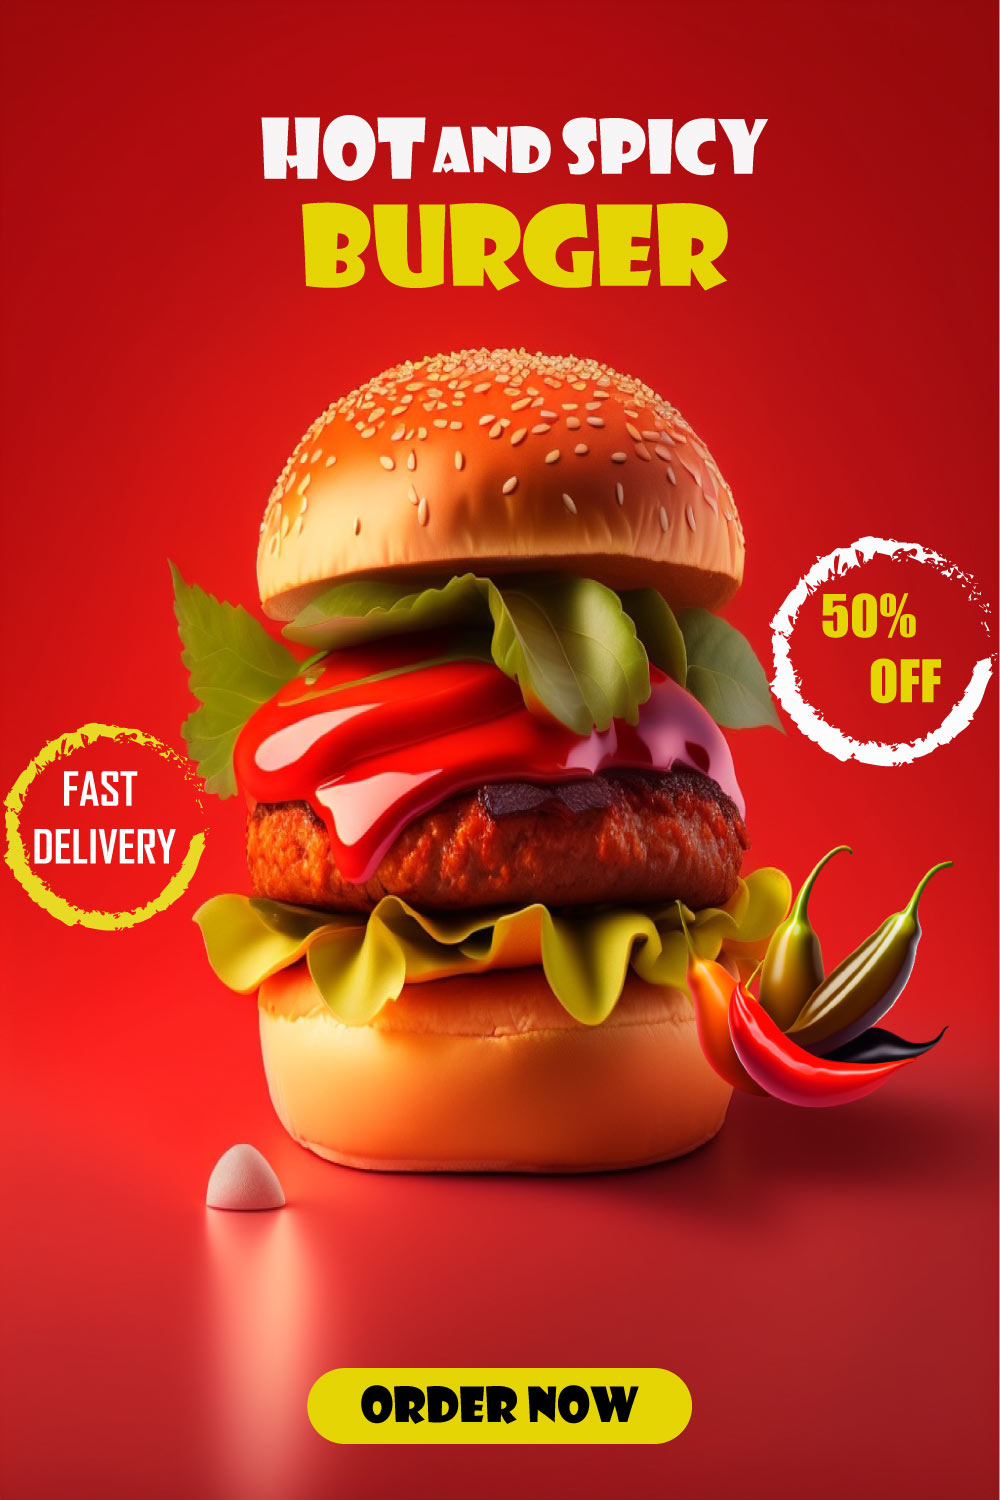 hot and spicy burger social media post template pinterest preview image.